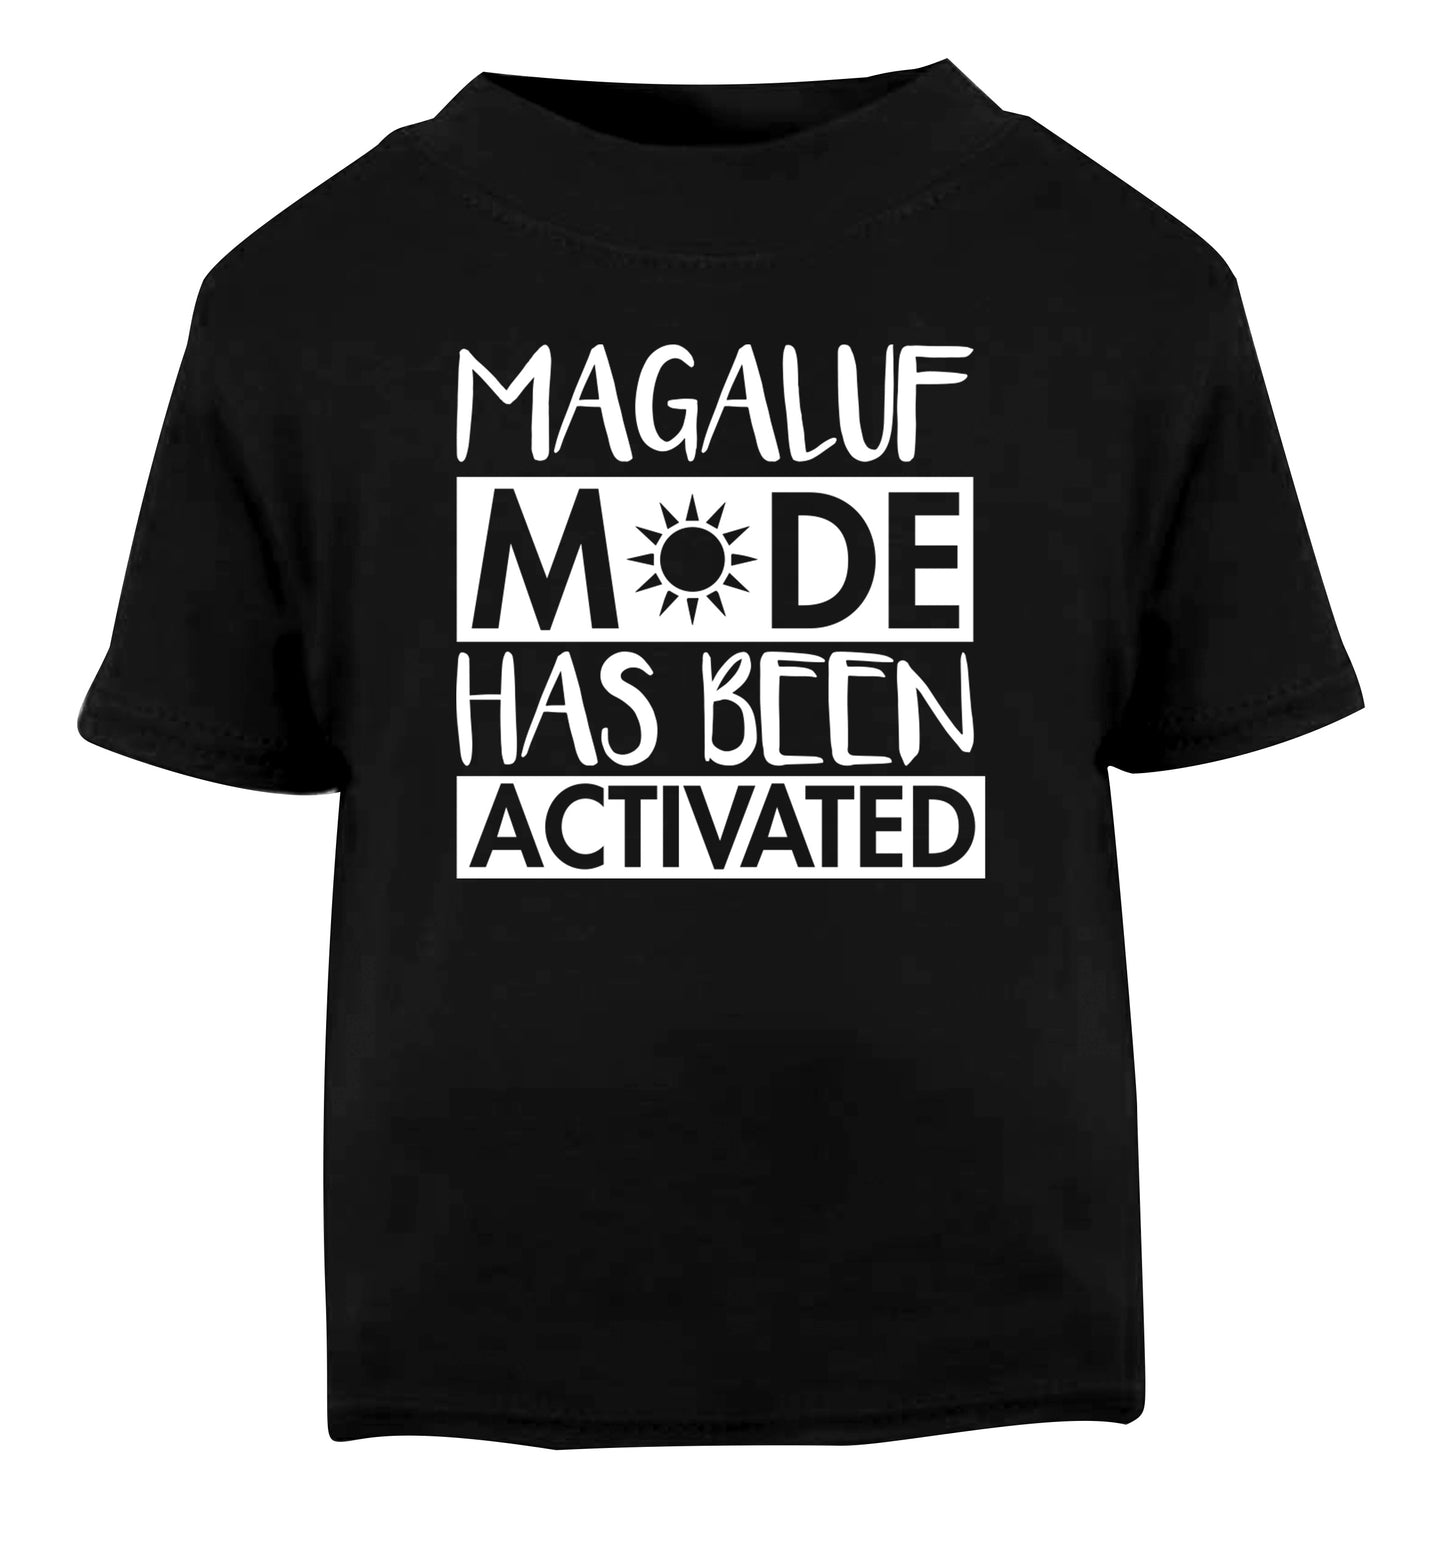 Magaluf mode has been activated Black Baby Toddler Tshirt 2 years